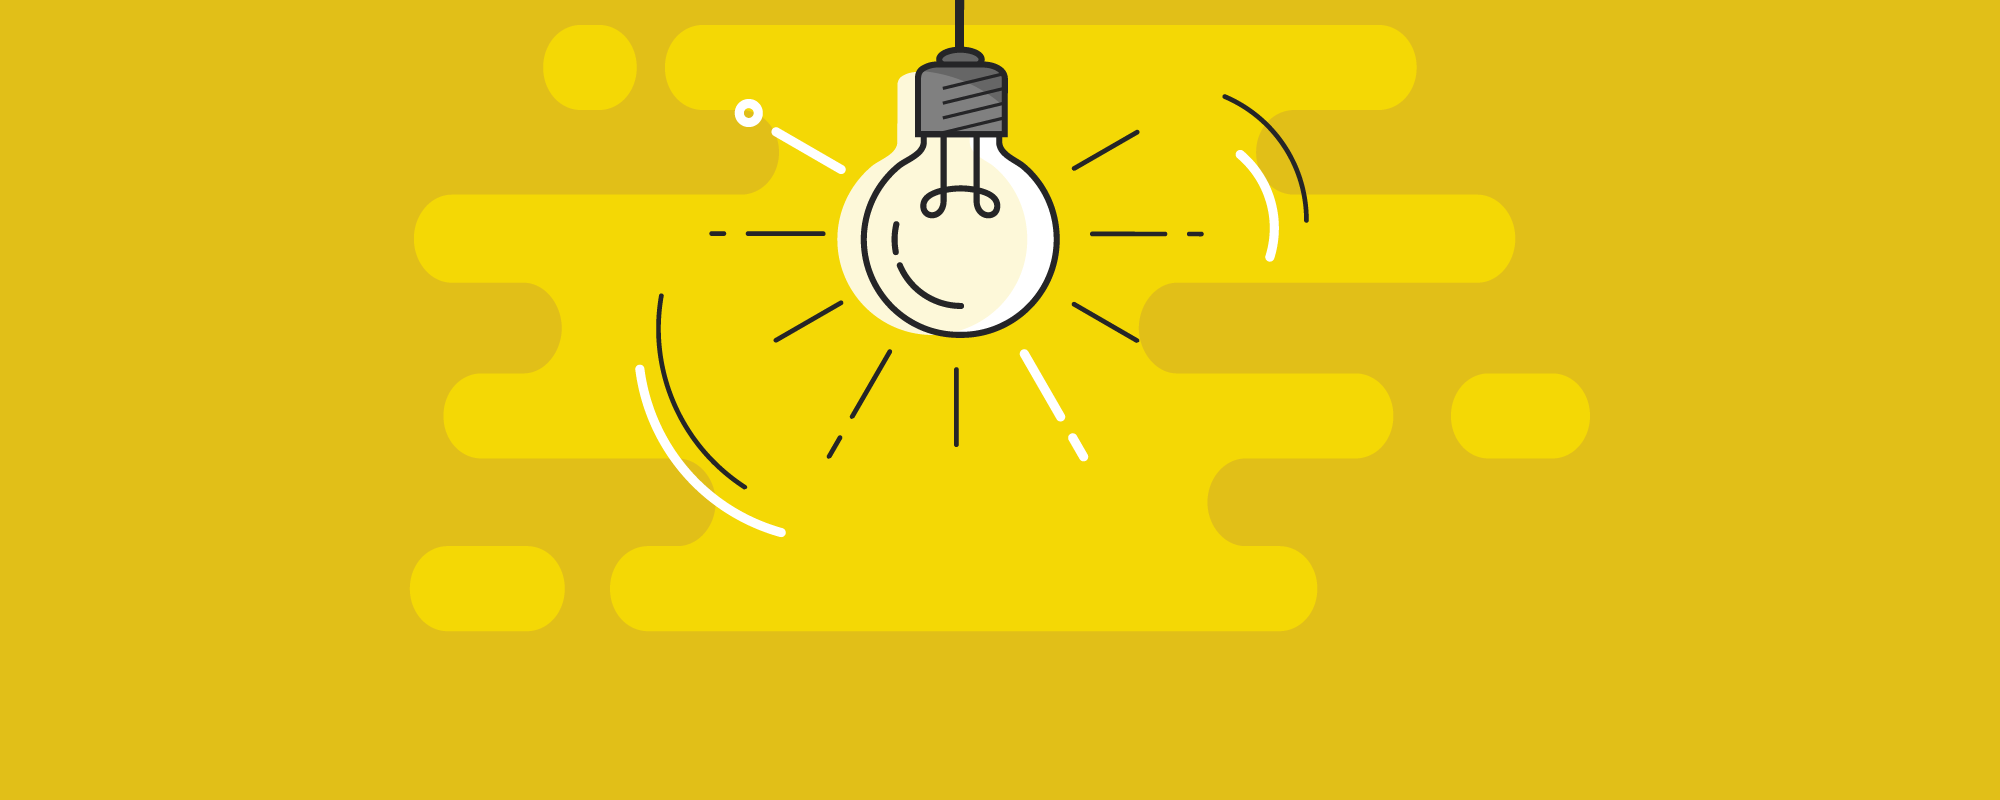 Glowing light bulb graphic